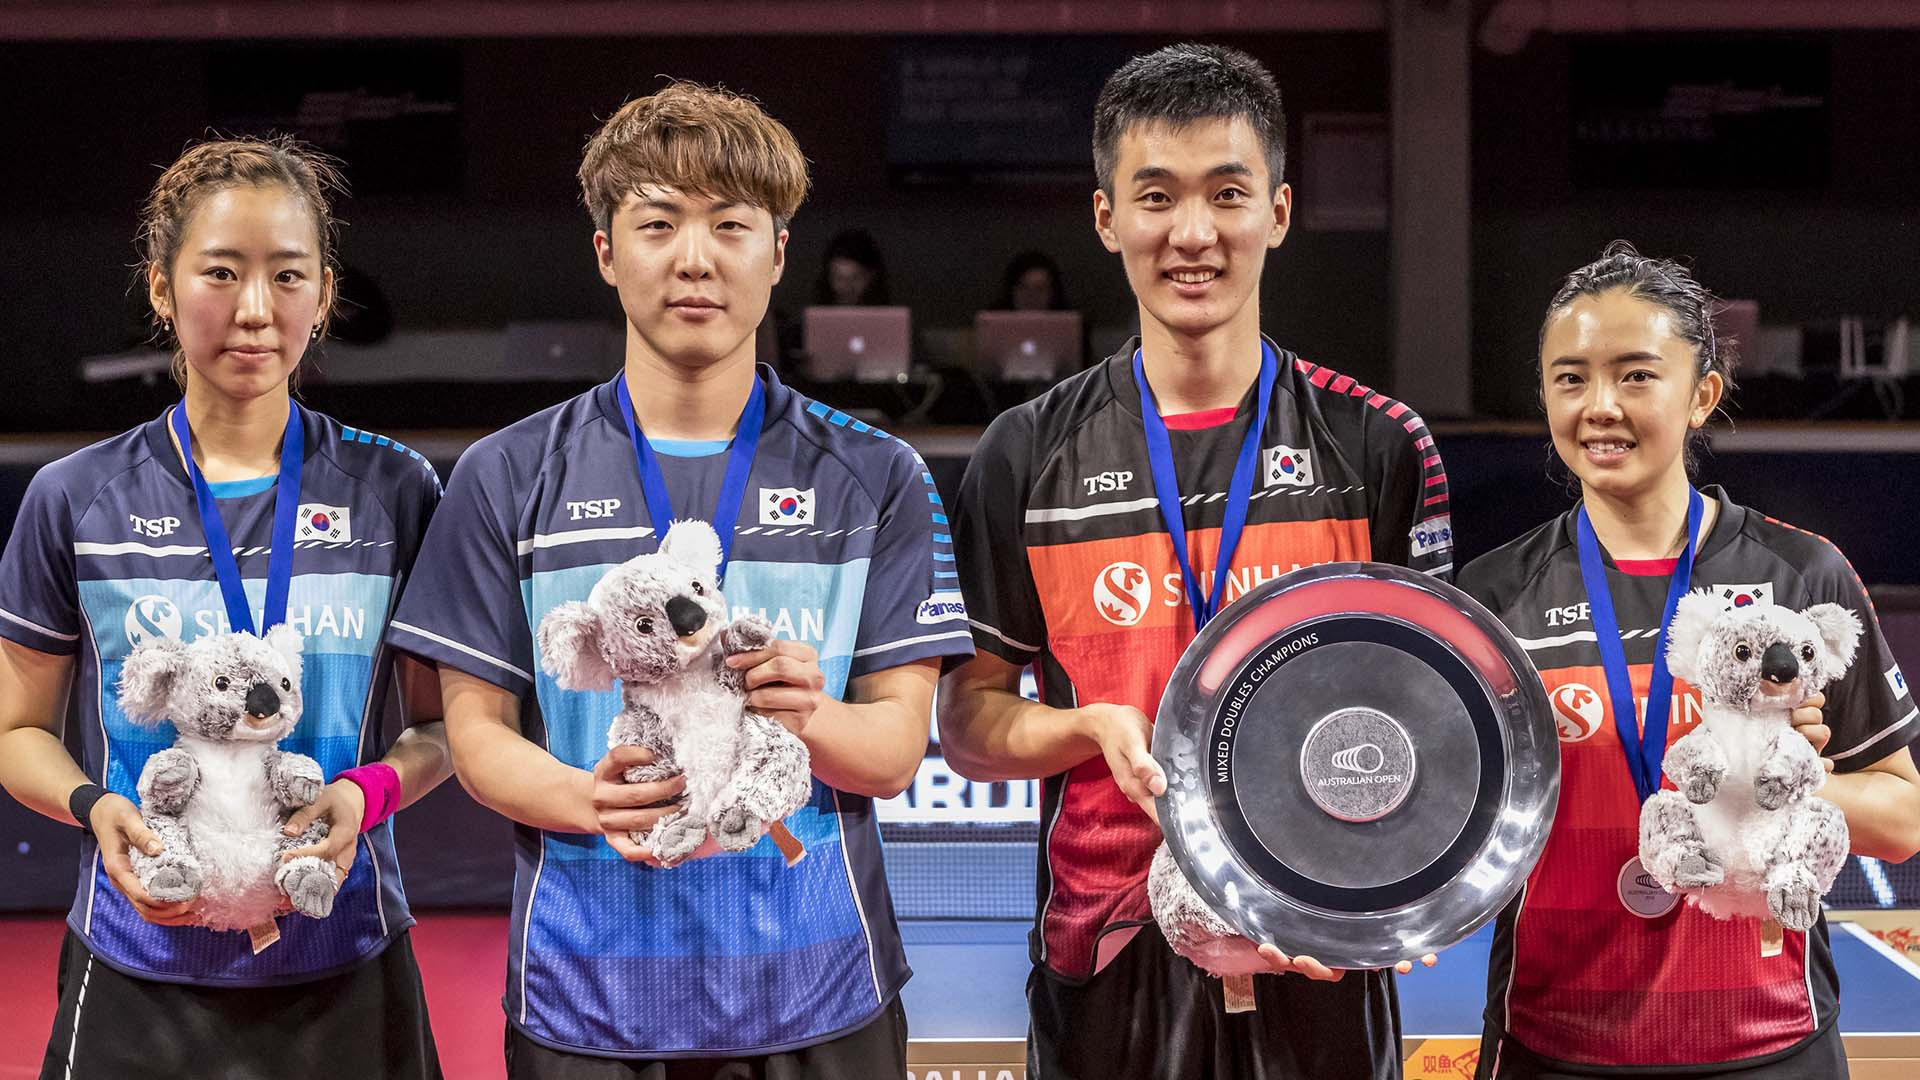 Lee and Jeon beat South Korean team-mates to claim mixed doubles crown at ITTF Australian Open